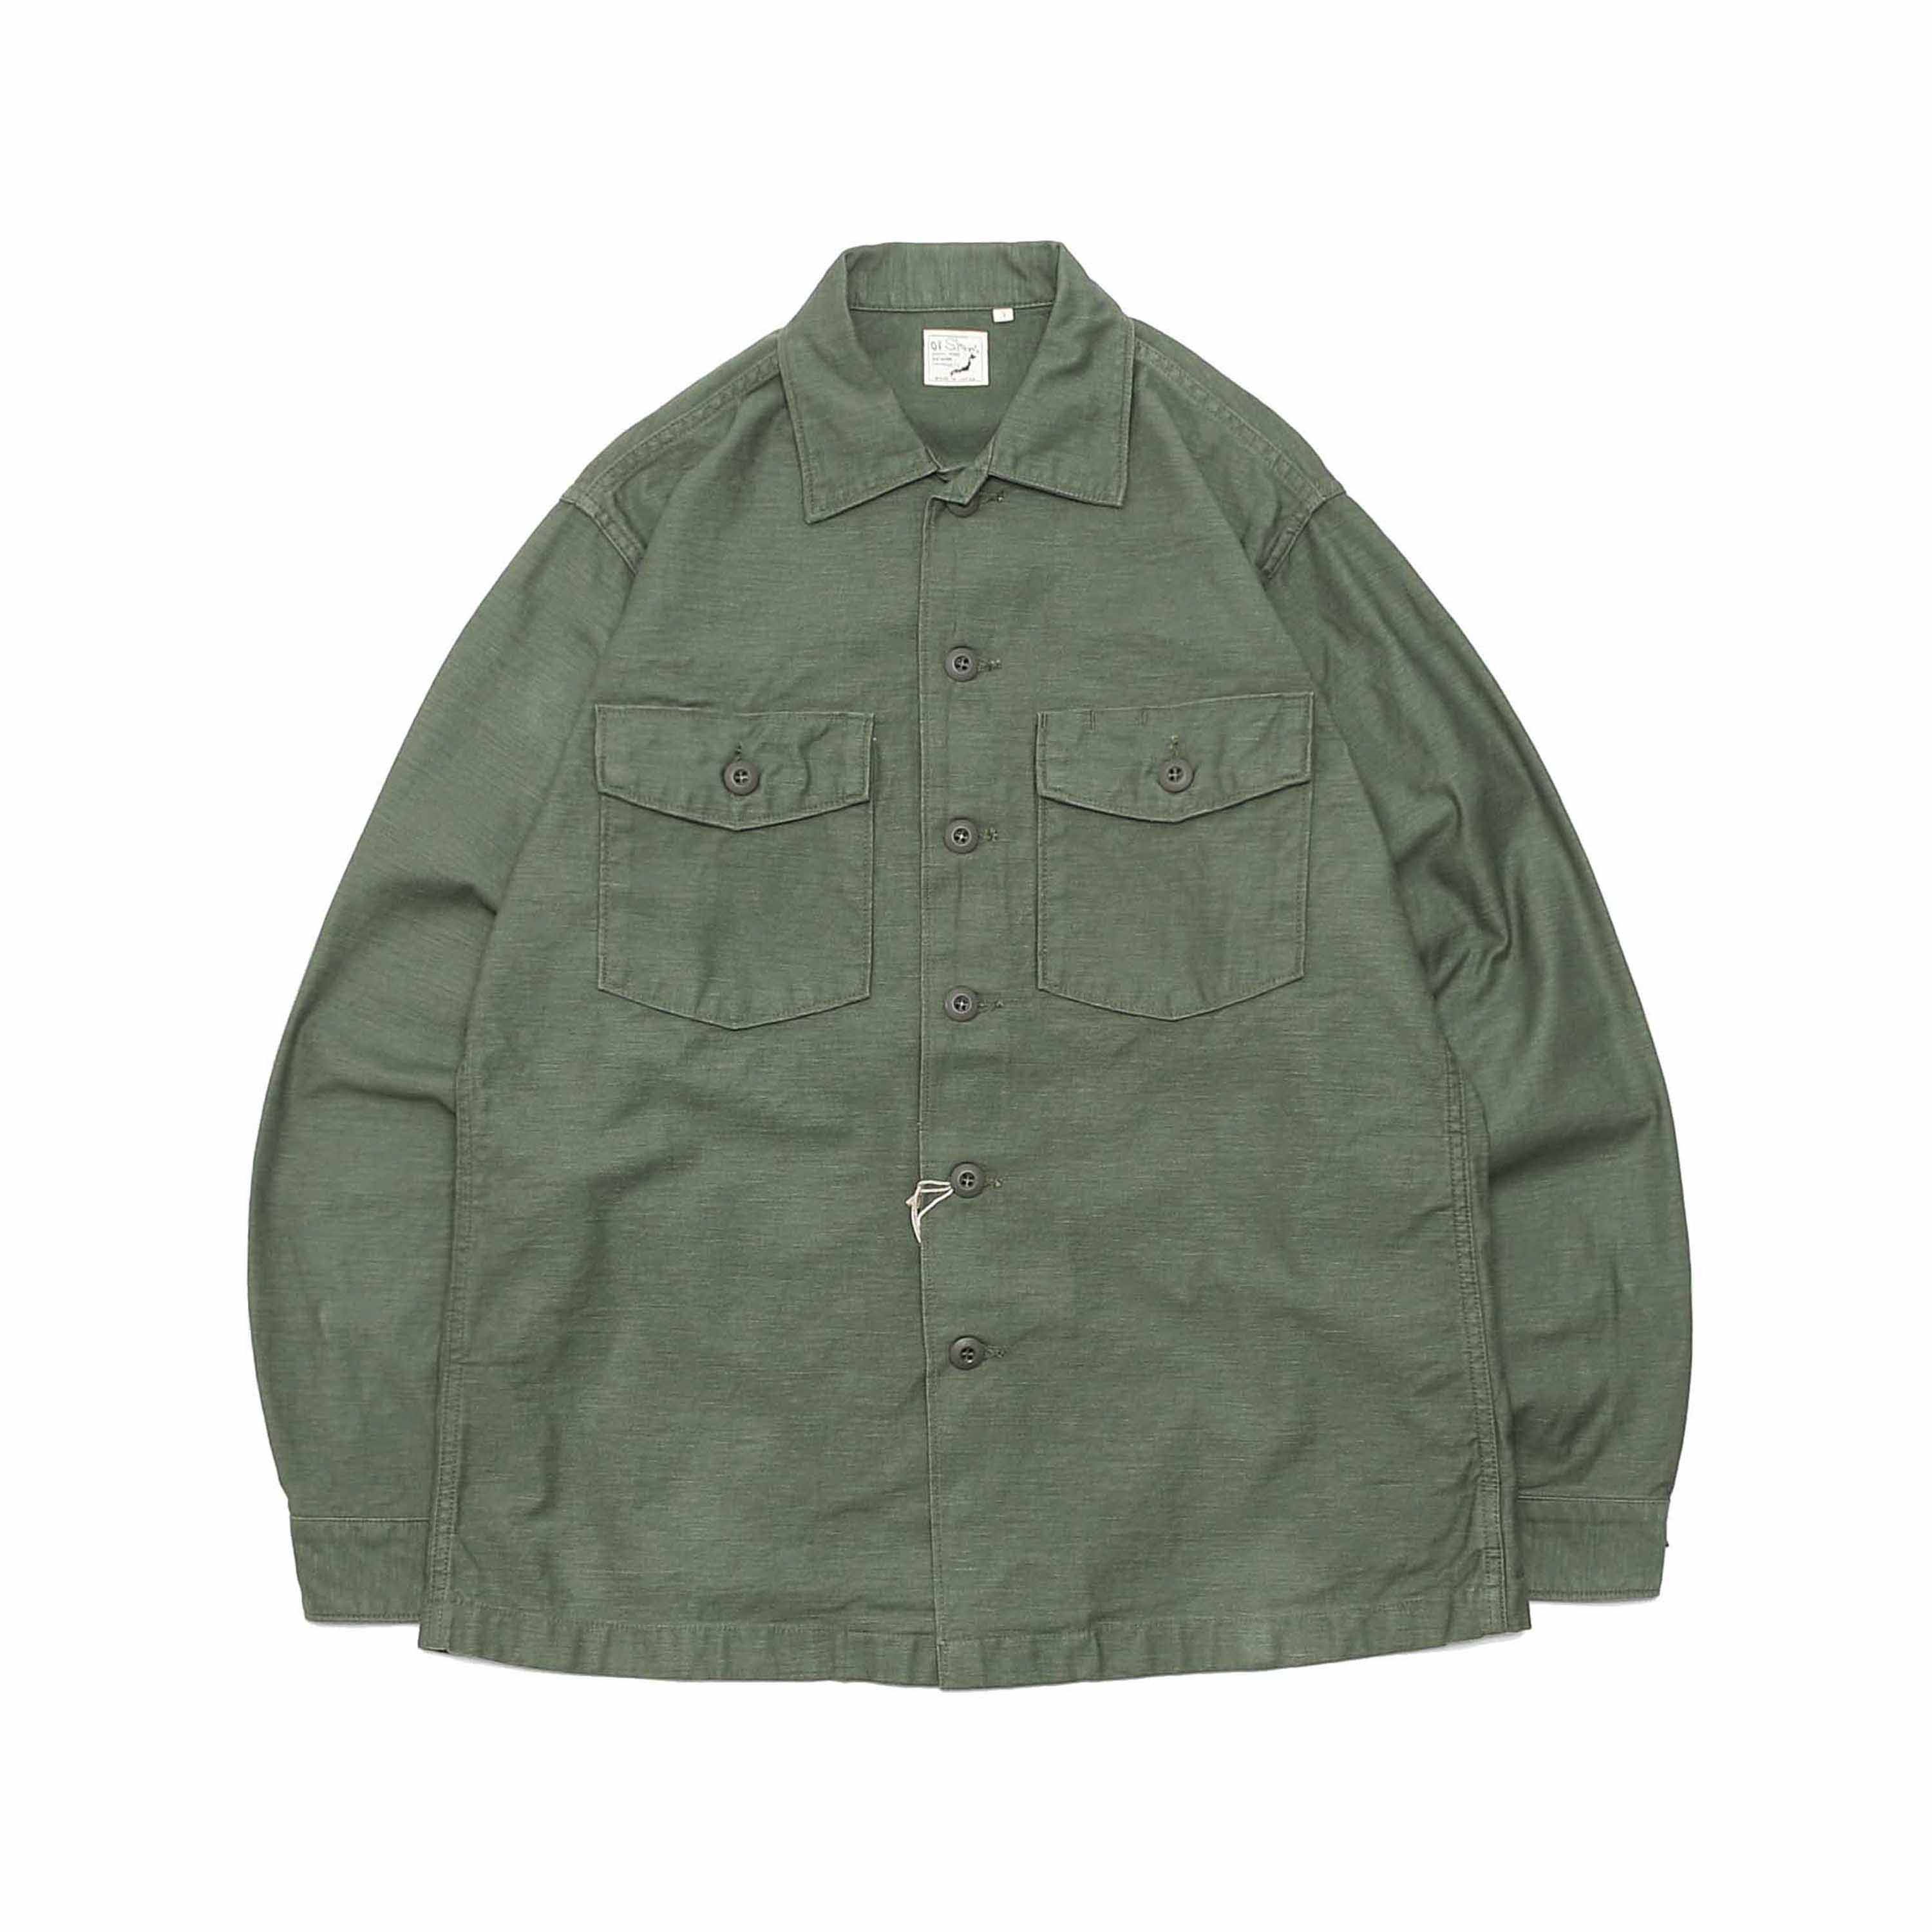 US ARMY SHIRT - OLIVE GREEN